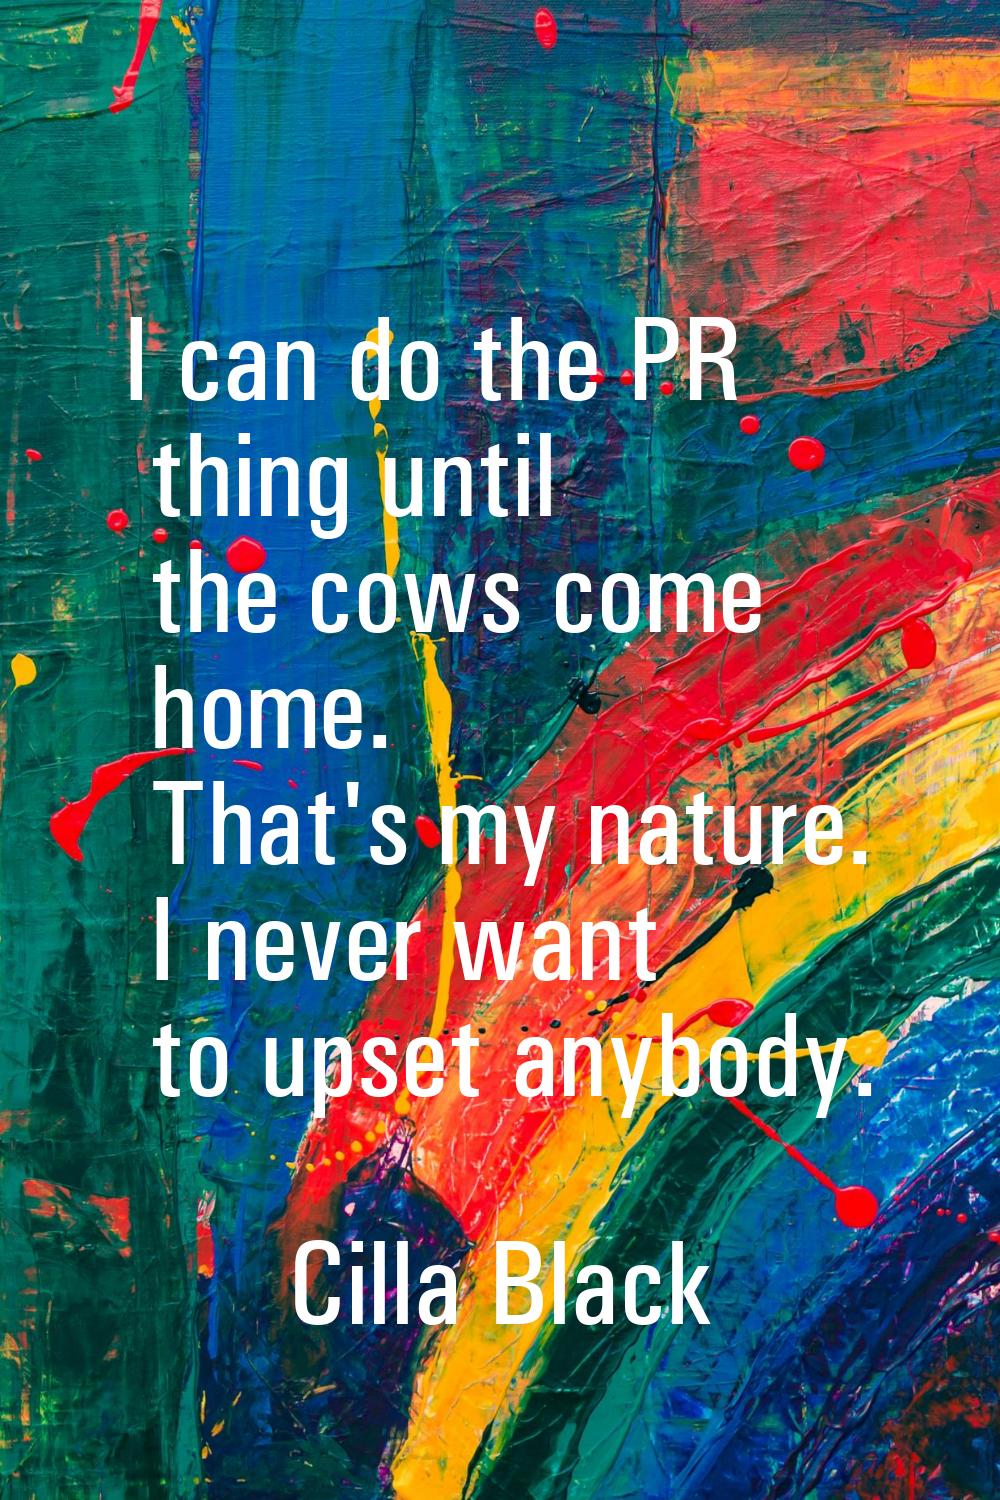 I can do the PR thing until the cows come home. That's my nature. I never want to upset anybody.